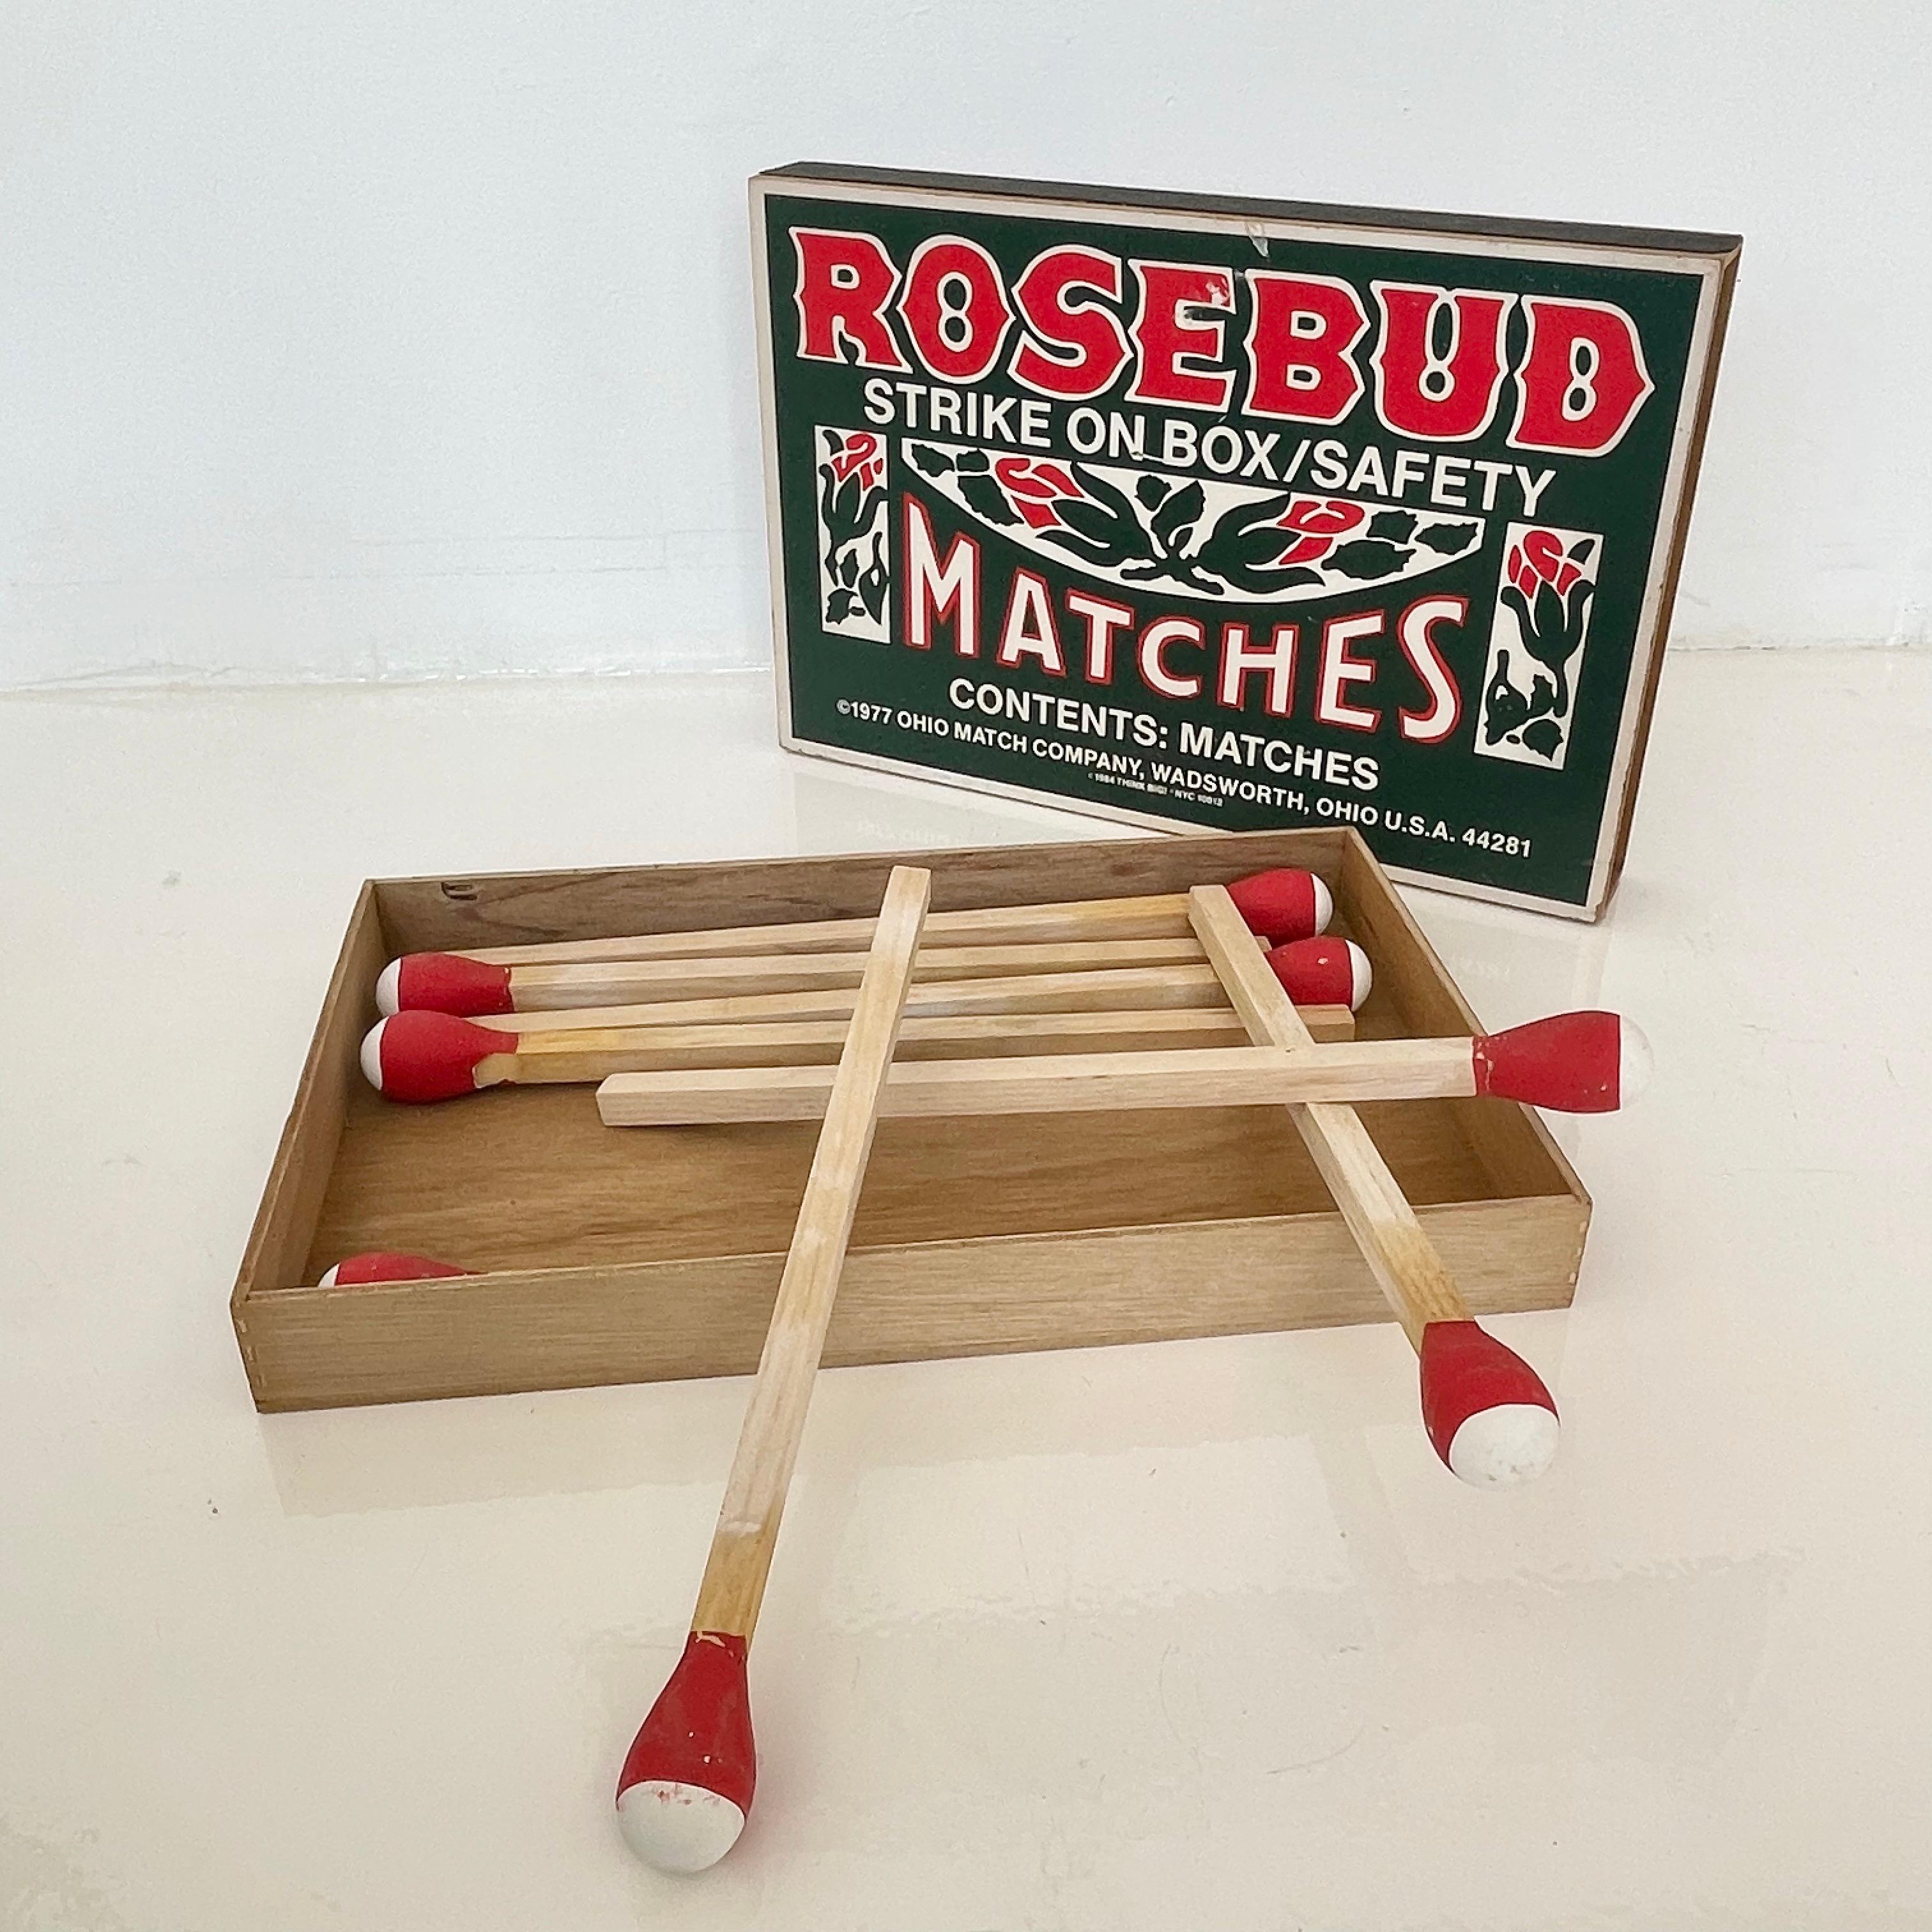 Fantastic set of oversized matches and matchbox, made by Think Big NYC in 1984. Set contains all 8 original matches. Box slides open as a normal matchbox would. Matches are removable. Surprisingly great condition for age with bright coloring and